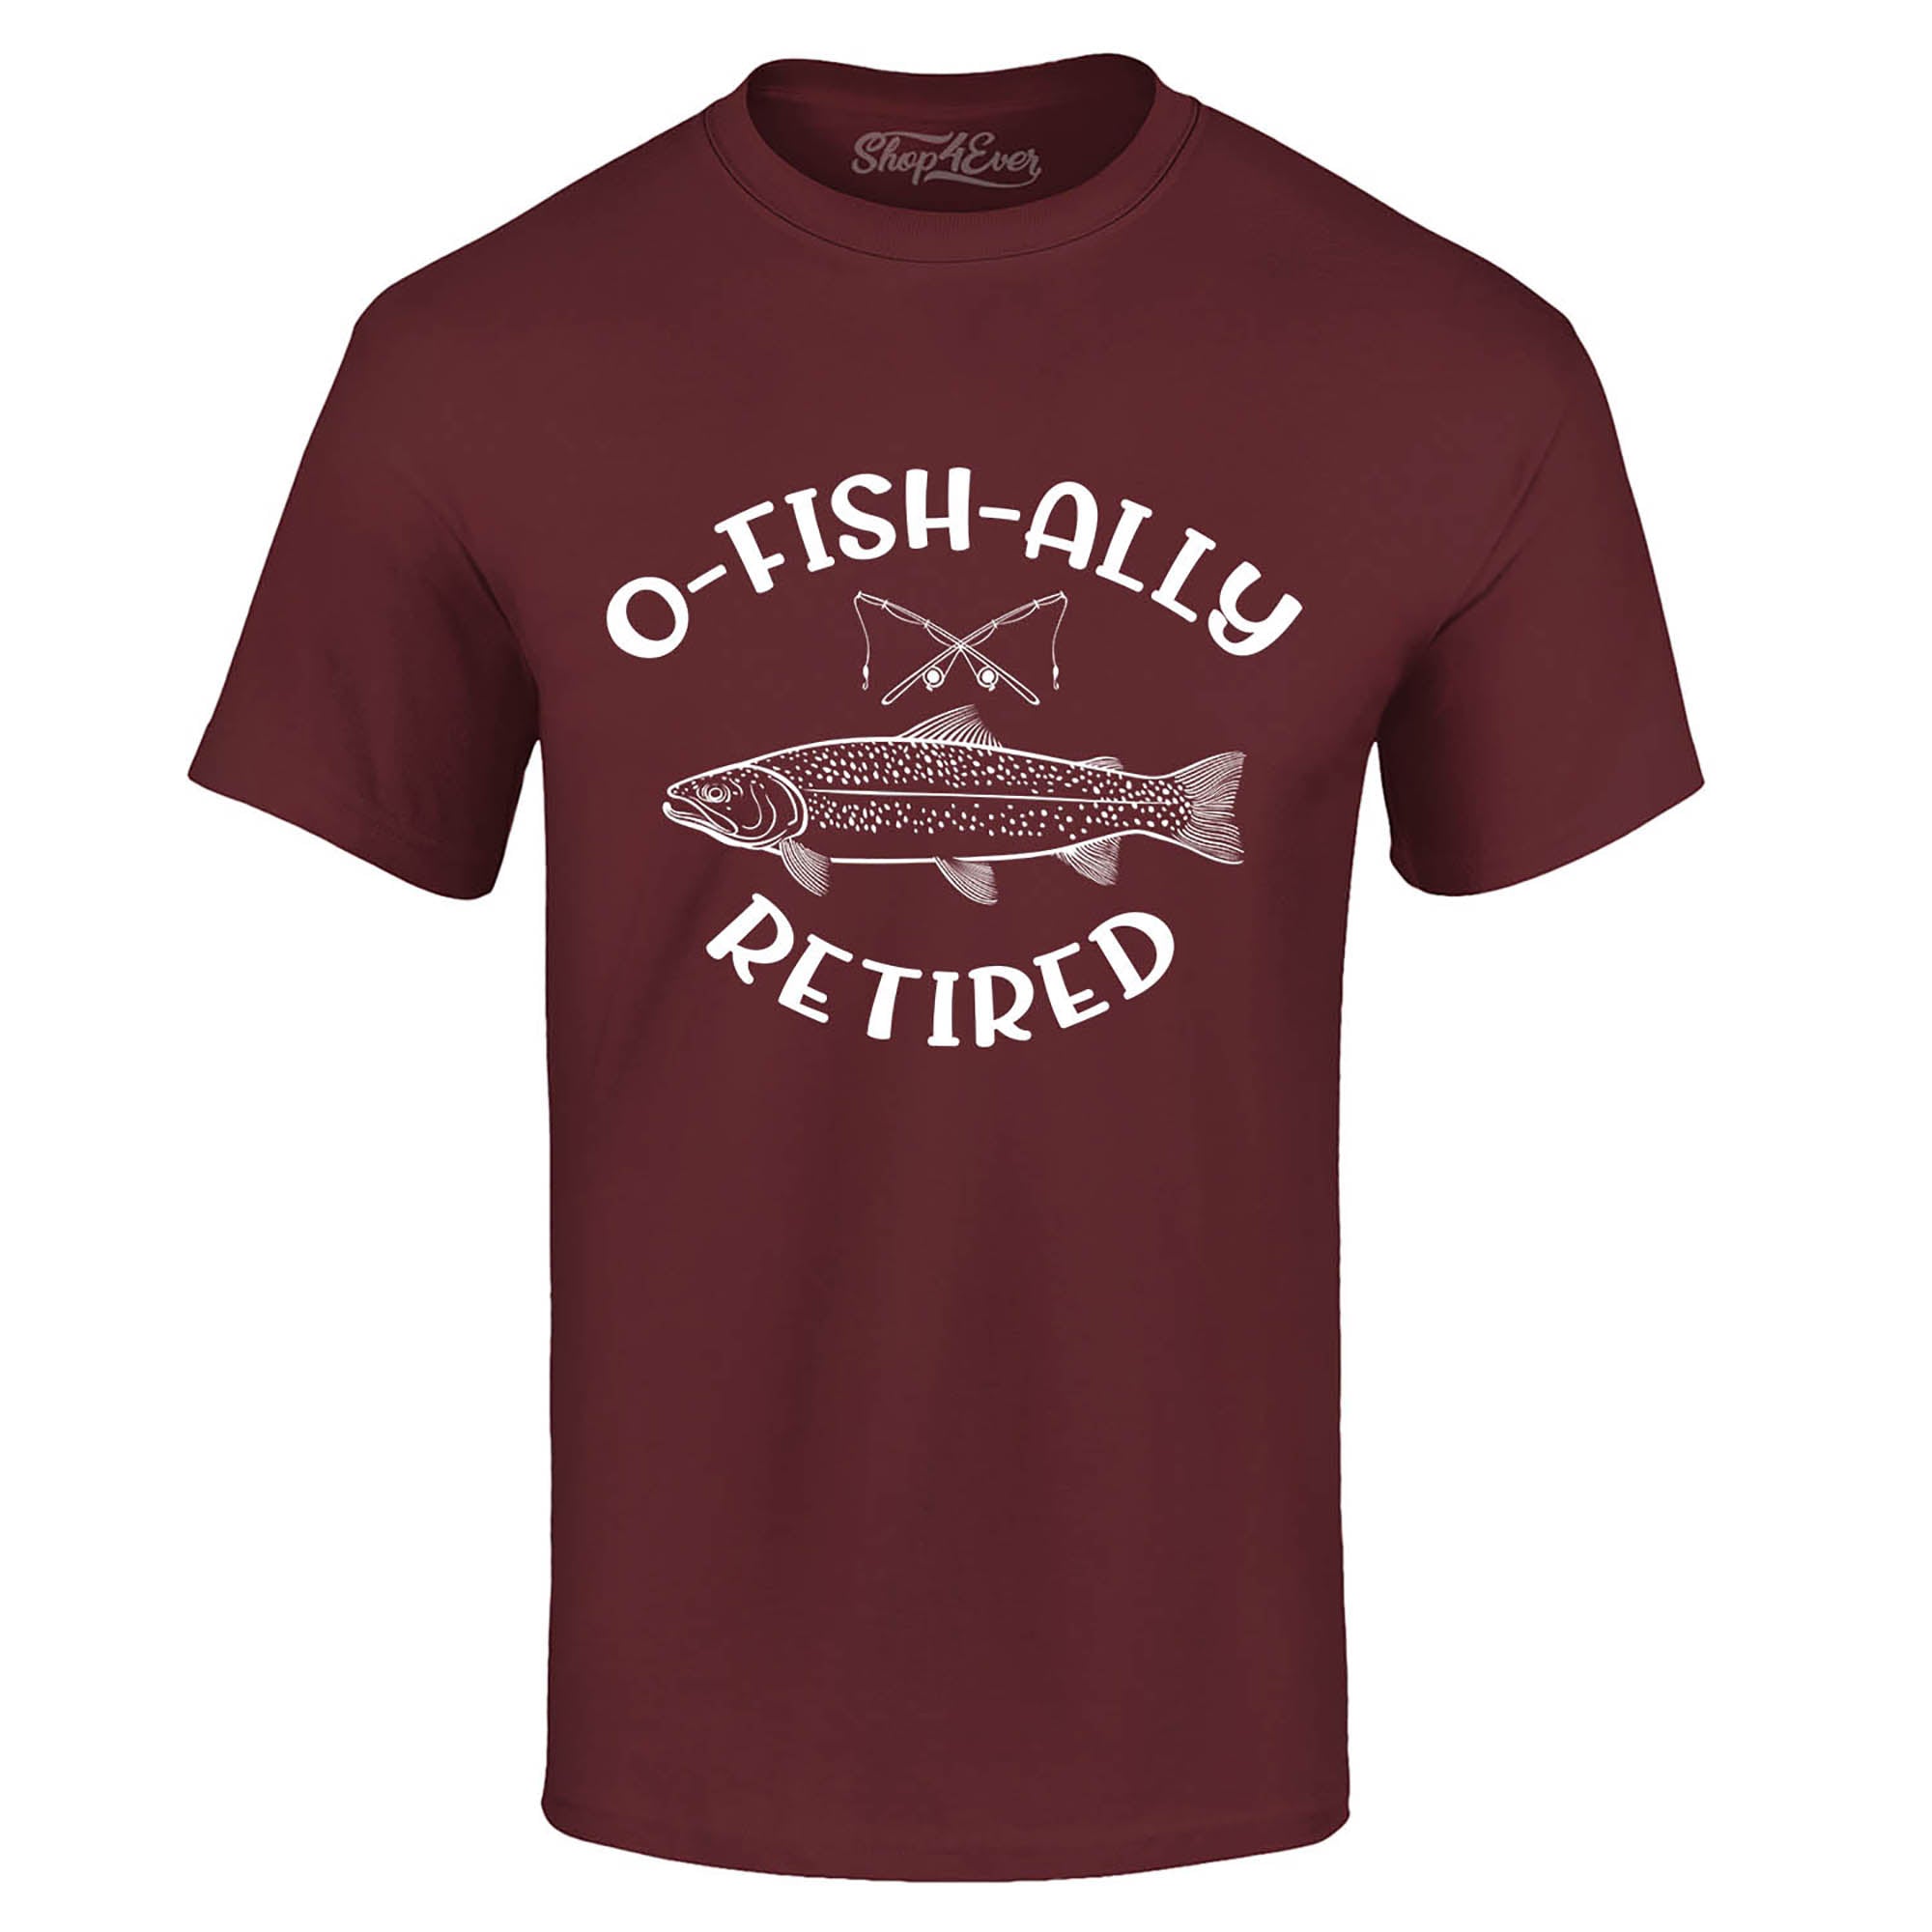 O Fish Ally Retired T-Shirt